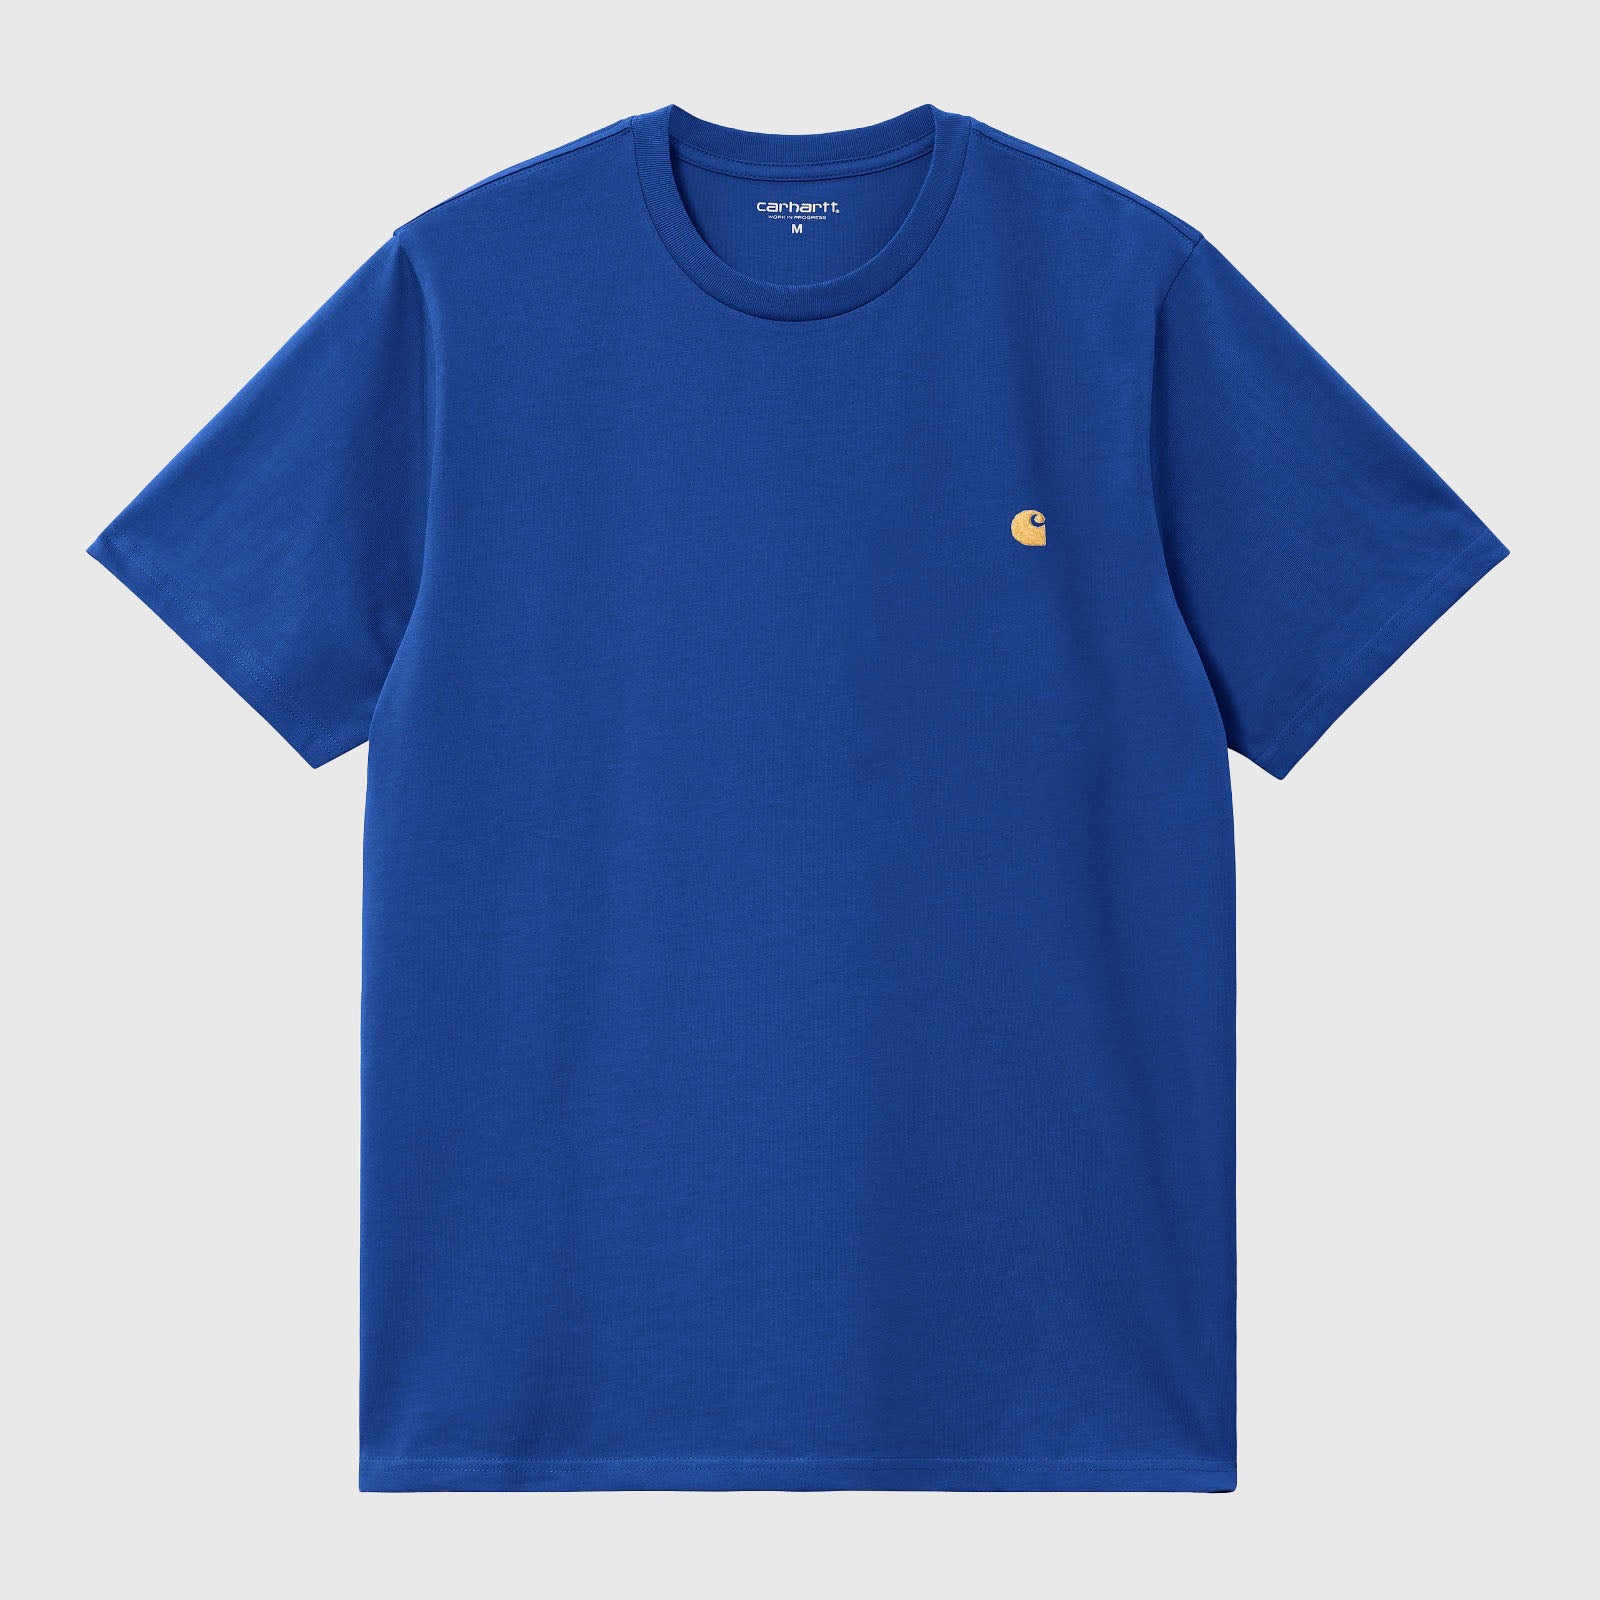 Carhartt WIP T-Shirt S/S Chase Cotton Royal - 2